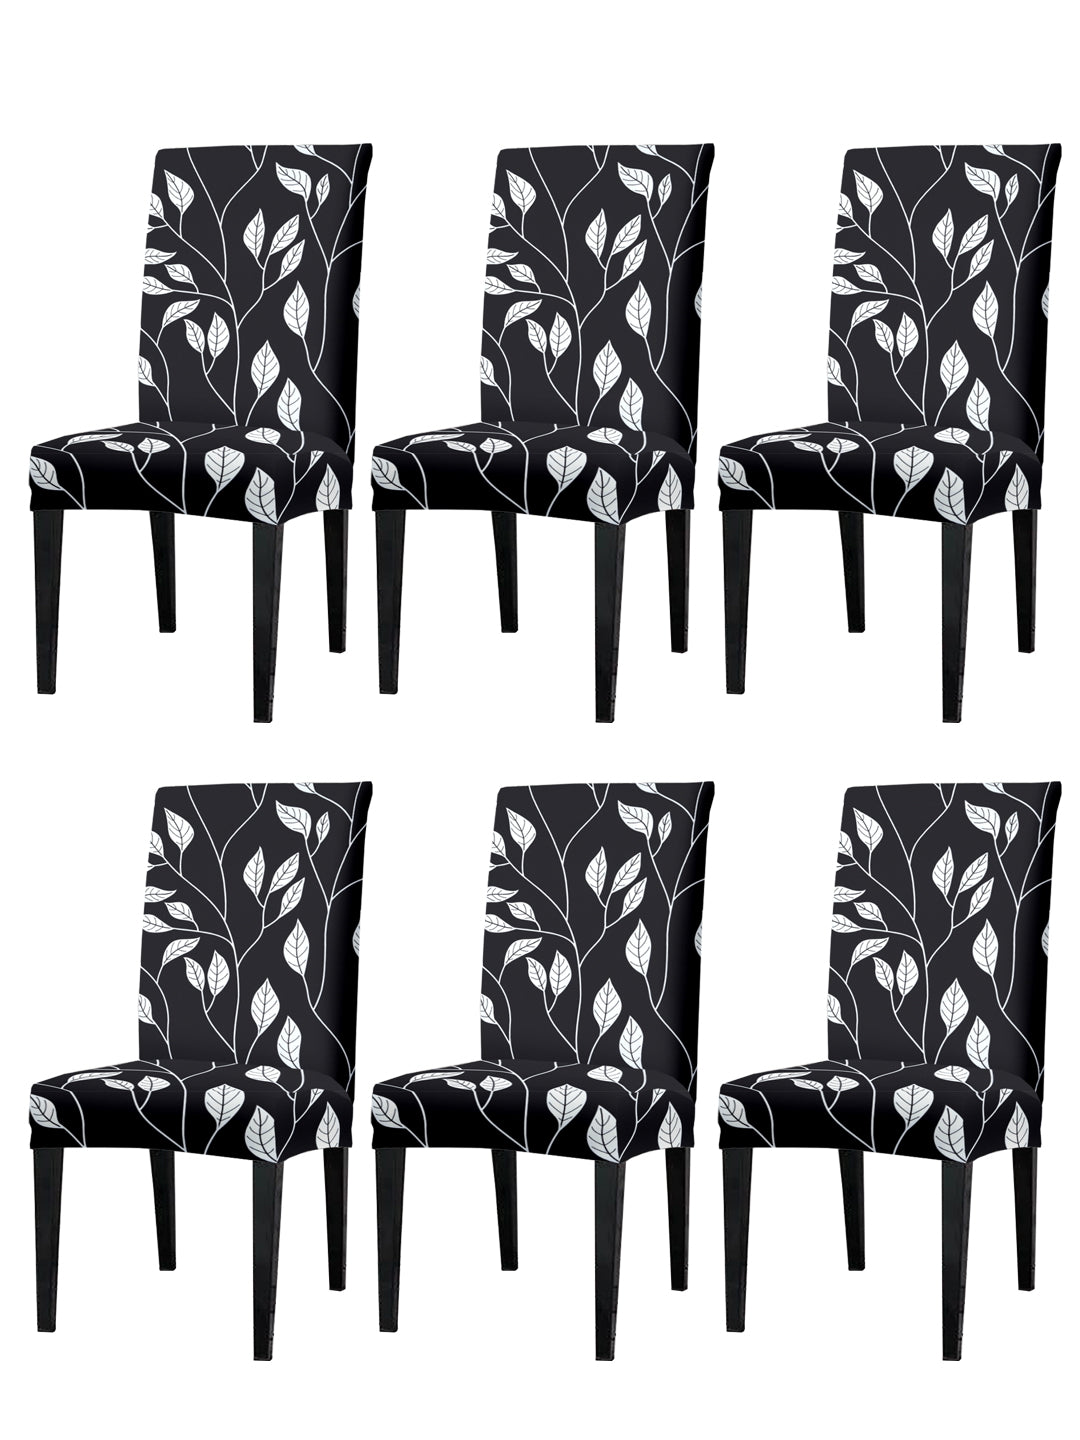 Elastic Floral Printed Non-Slip Dining Chair Covers Set of 6 - Black